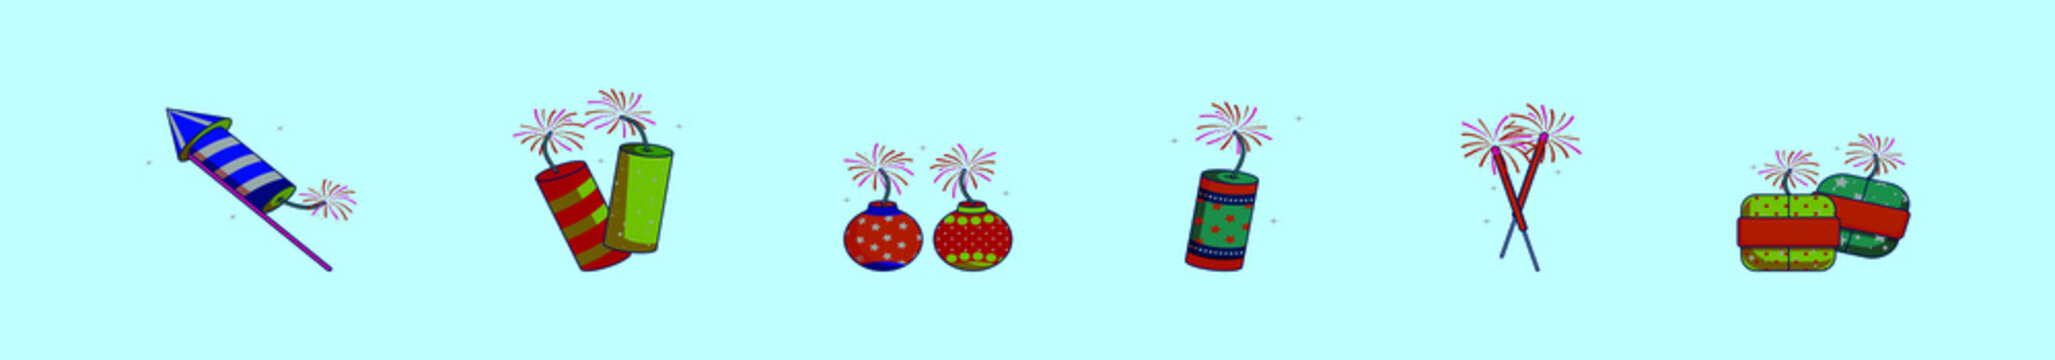 set of diwali crackers cartoon icon design template with various models. vector illustration isolated on blue background